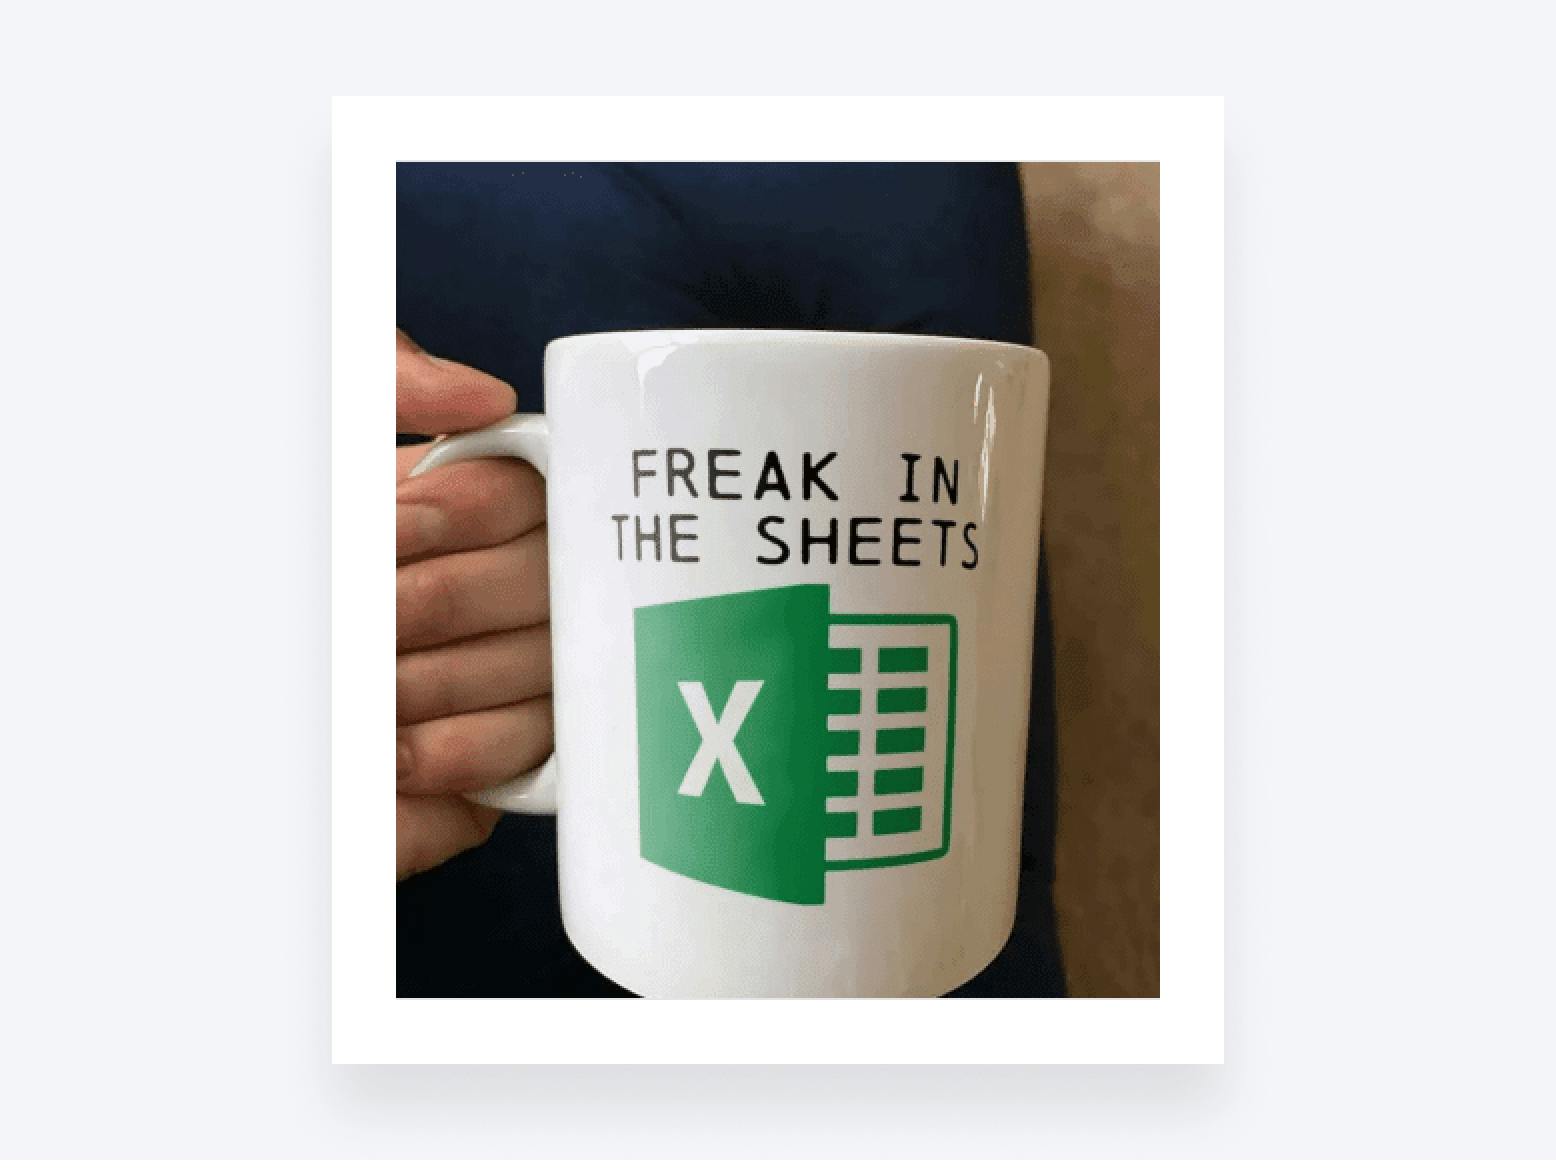 Accounting meme of proficiency in sheets… and in the sheets 